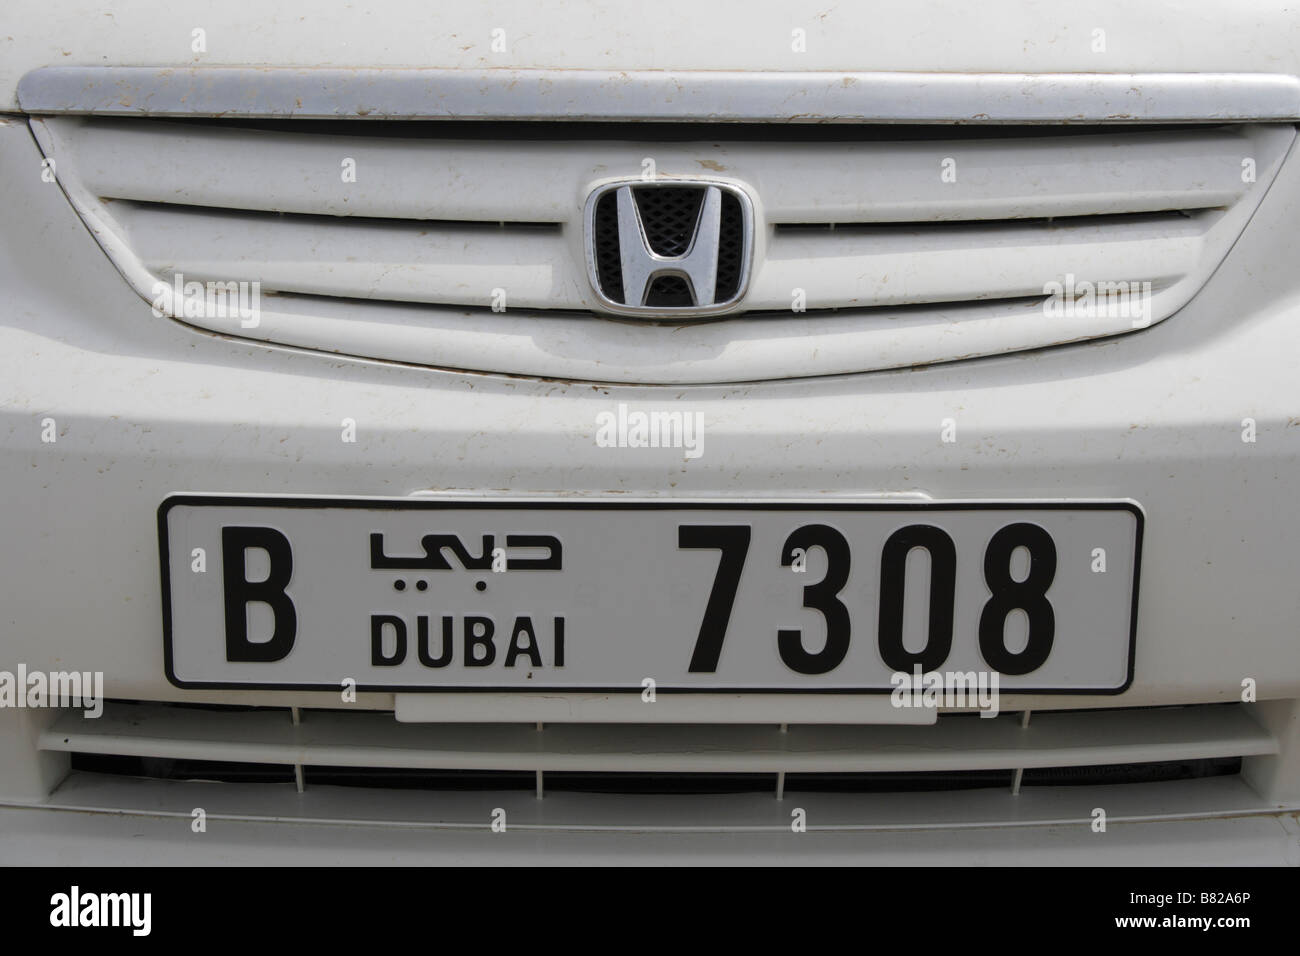 front of a white Honda car with Dubai license plate. Photo by Willy Matheisl Stock Photo